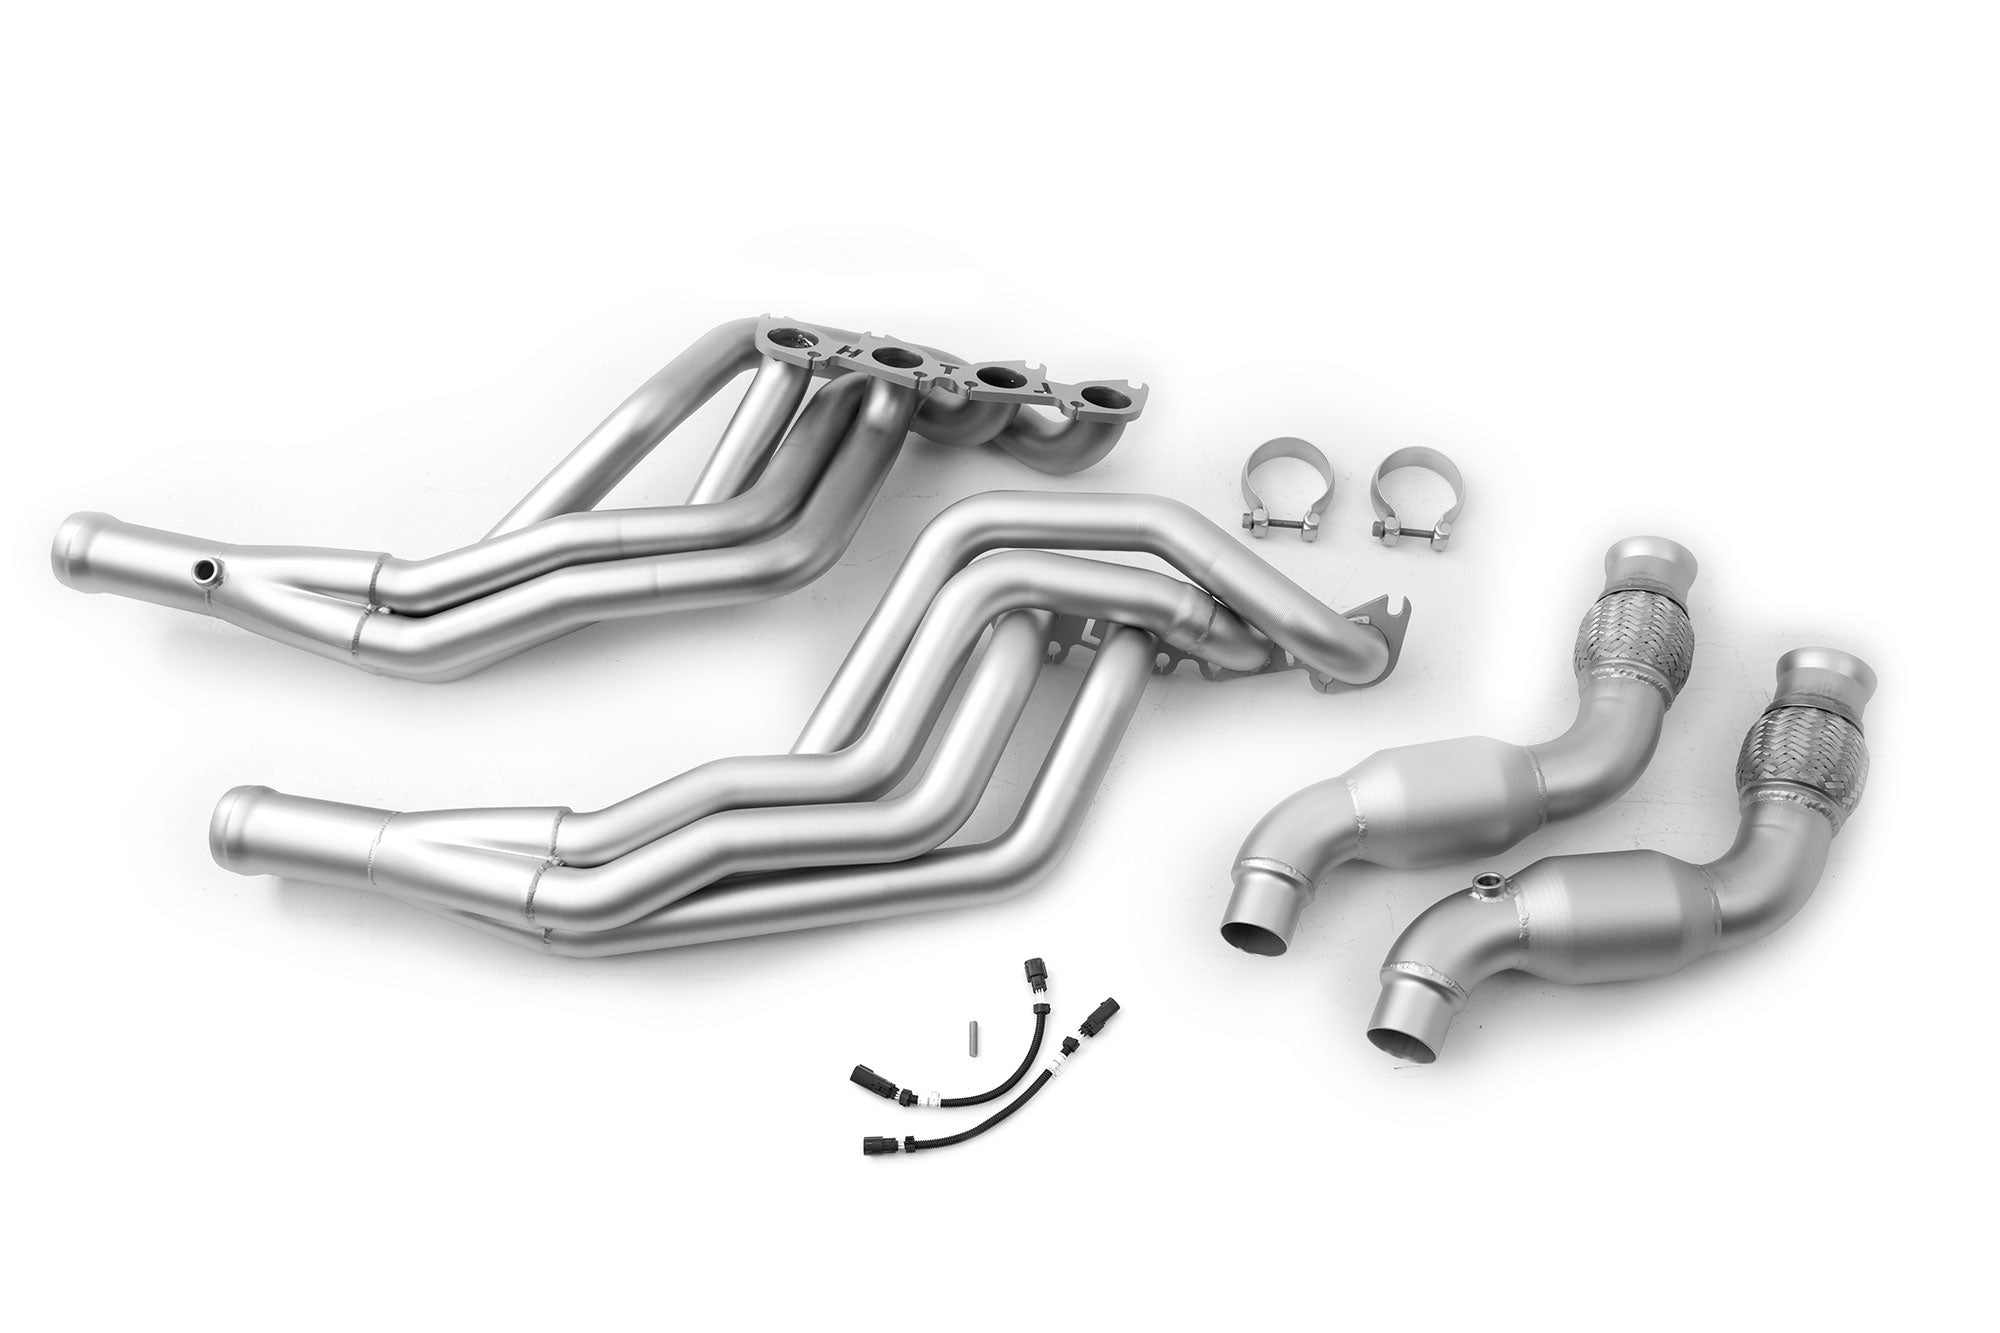 LTH S550 Mustang Tube Long Headers - Chat / Décat (2015-23)